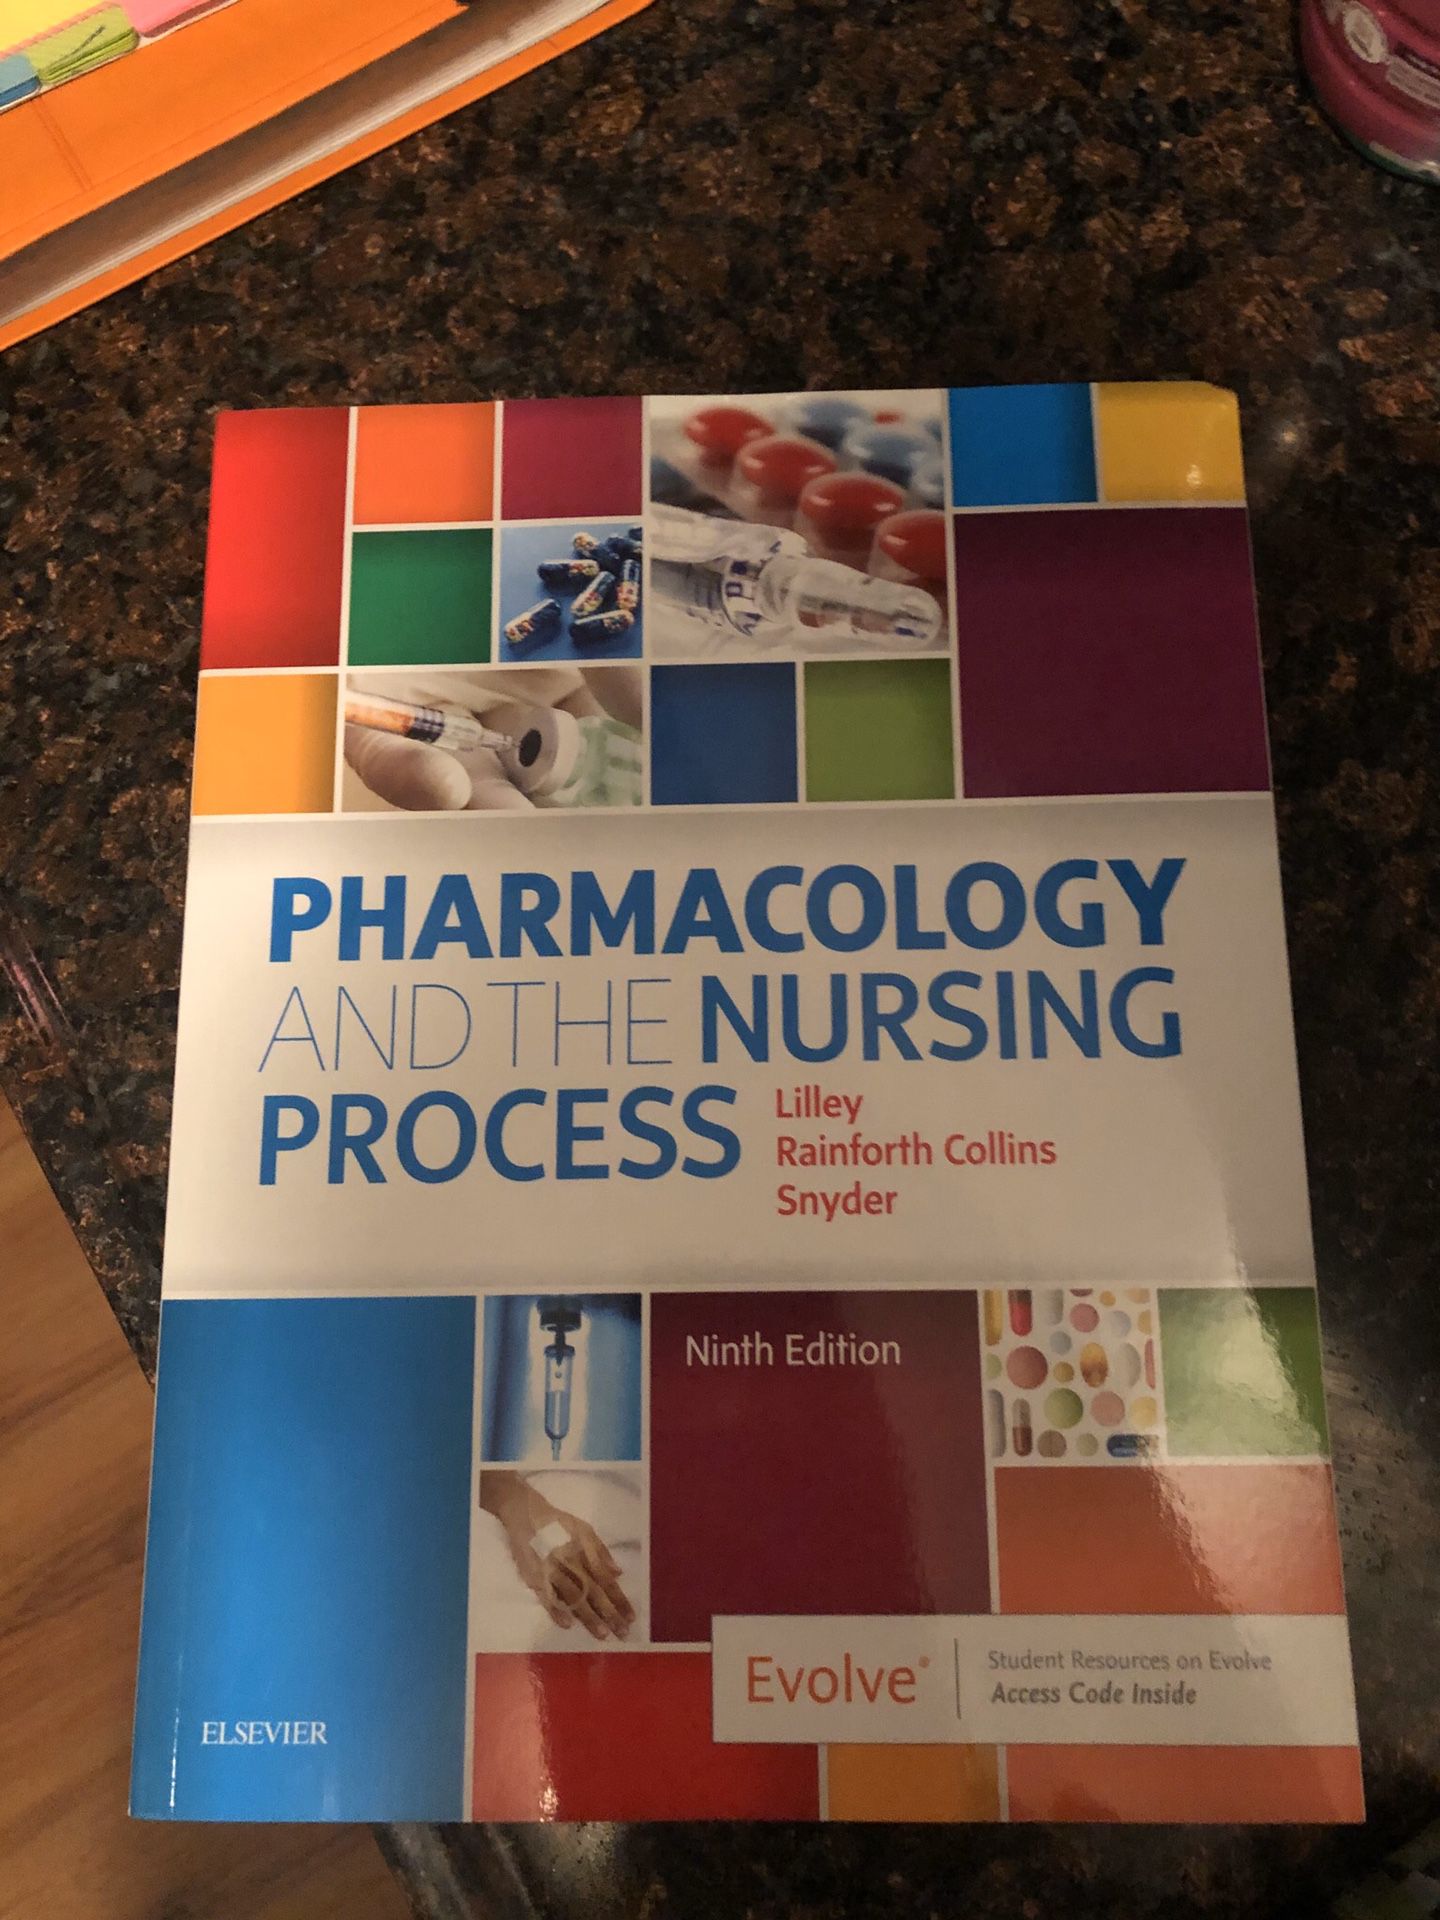 Pharmacology and the nursing process 9th edition